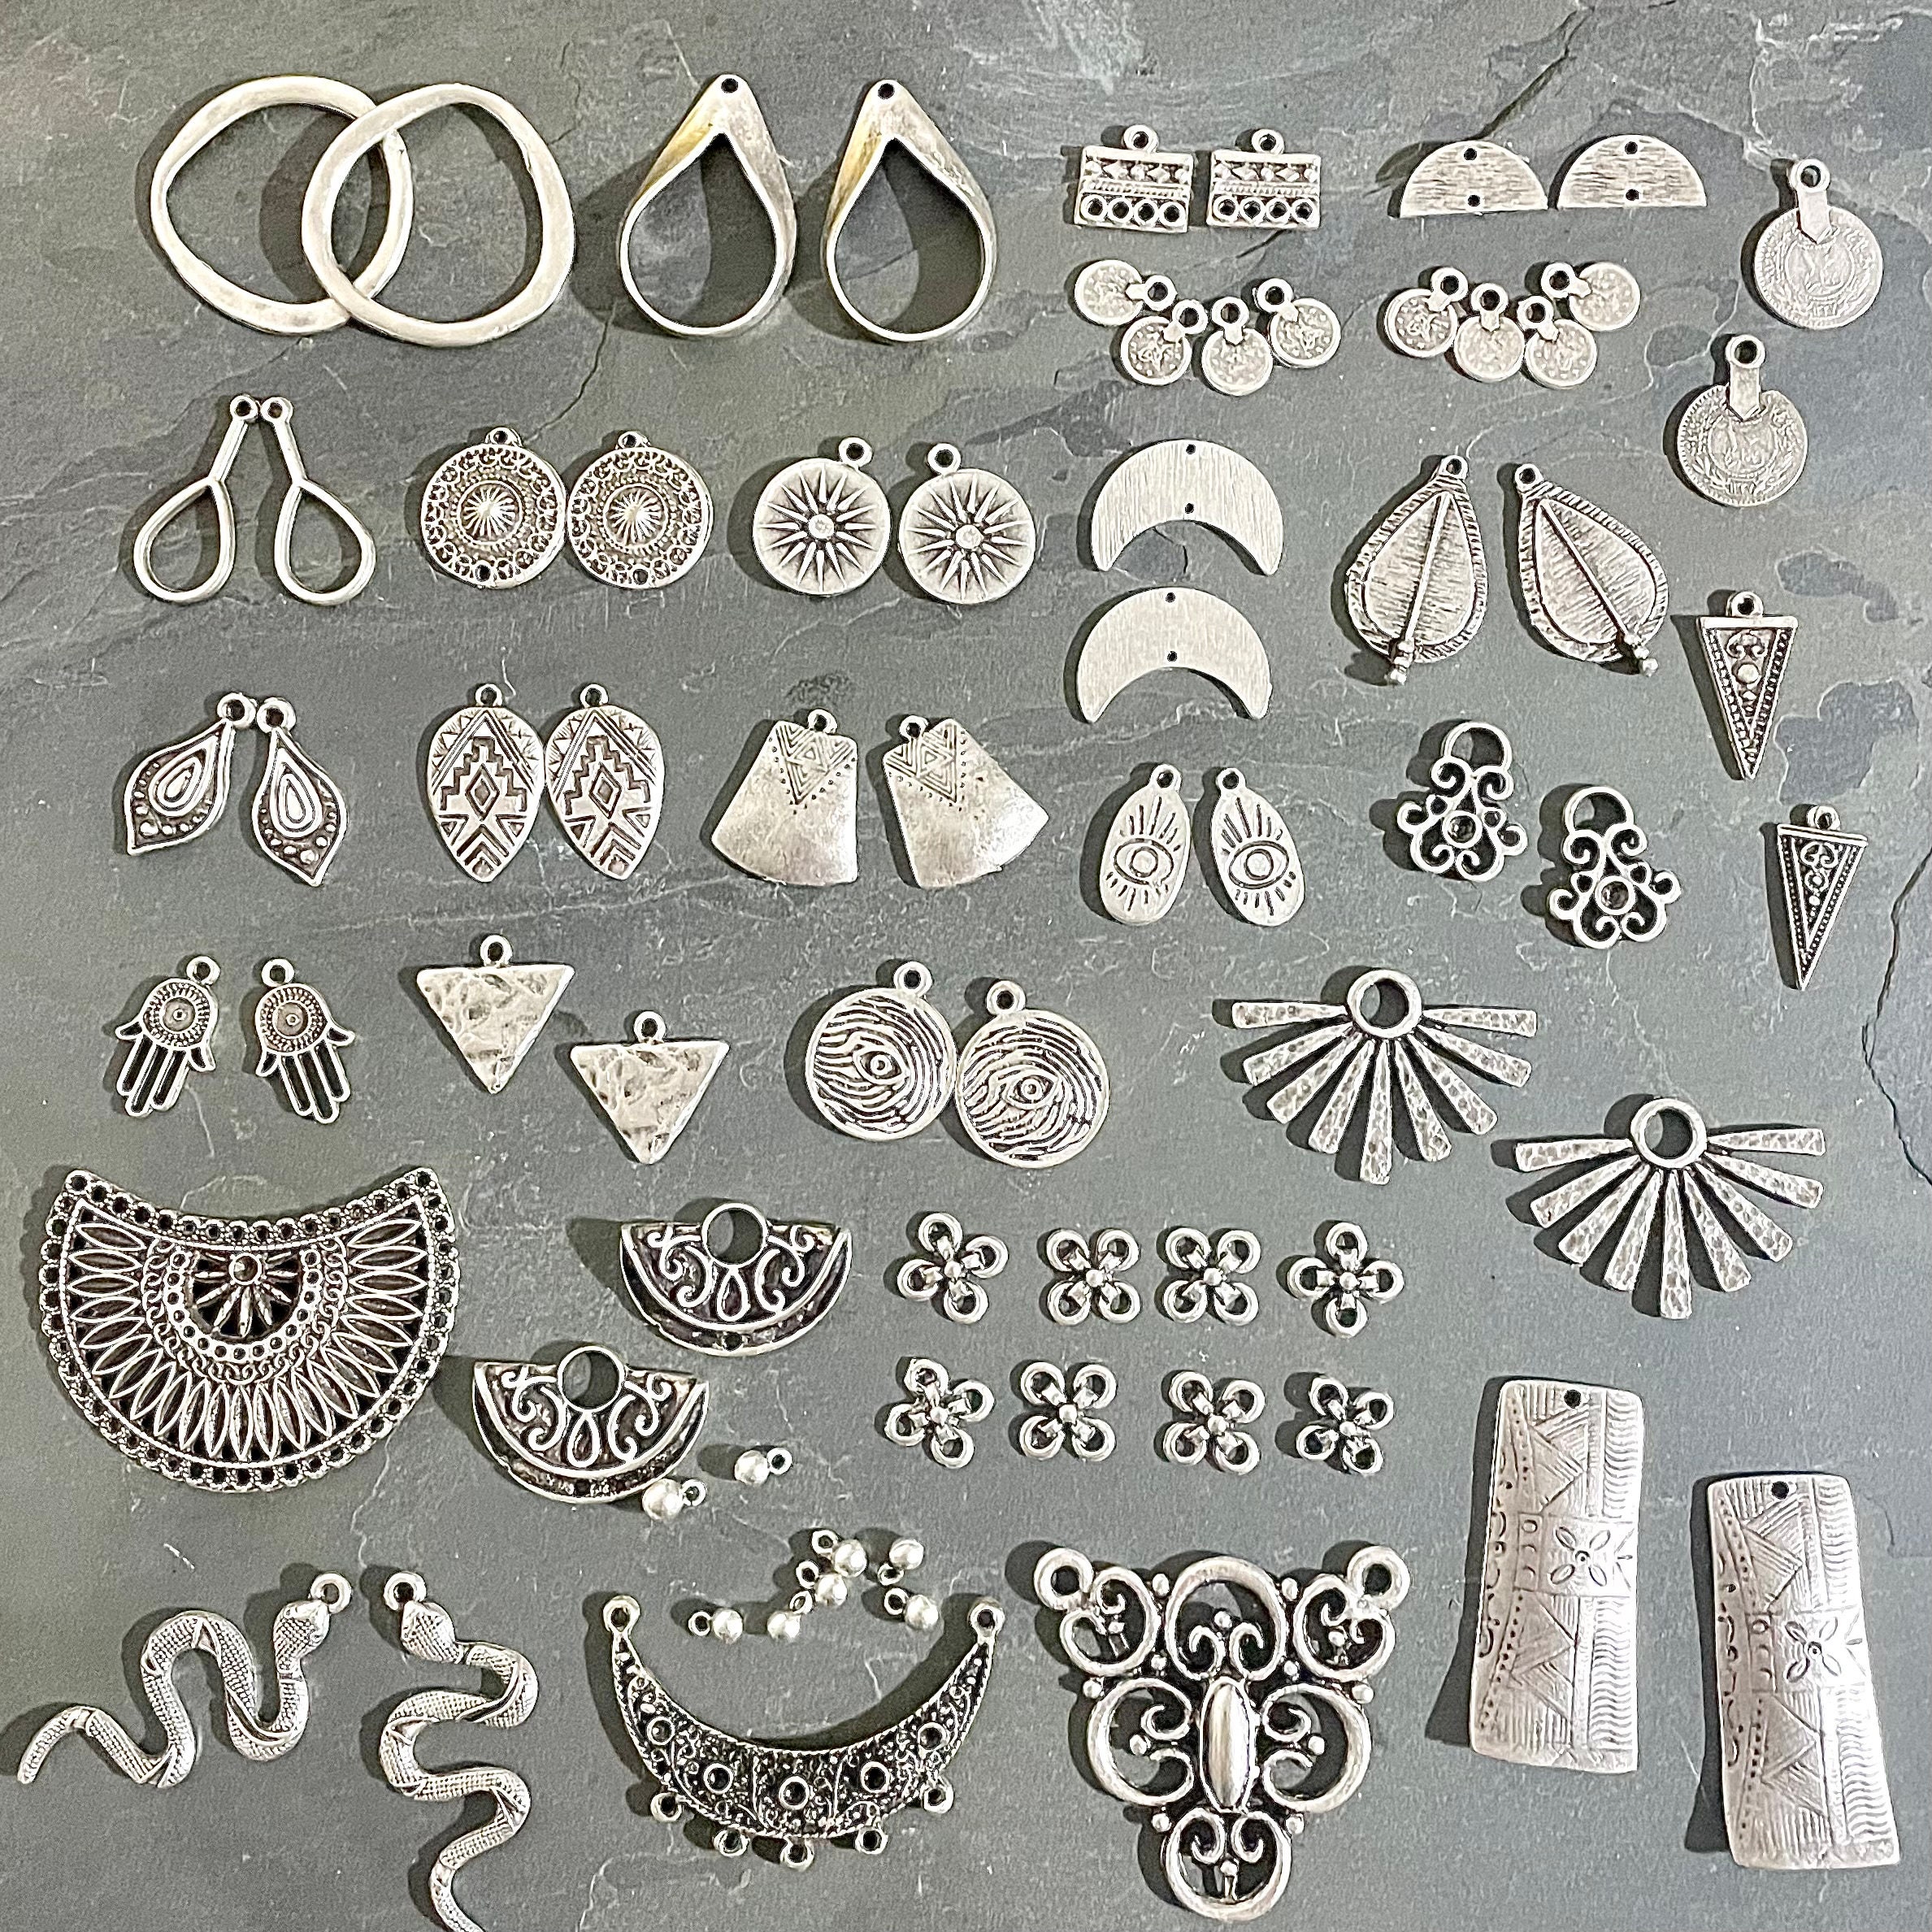 Earring Findings and Earring Components - Wholesale Pricing at